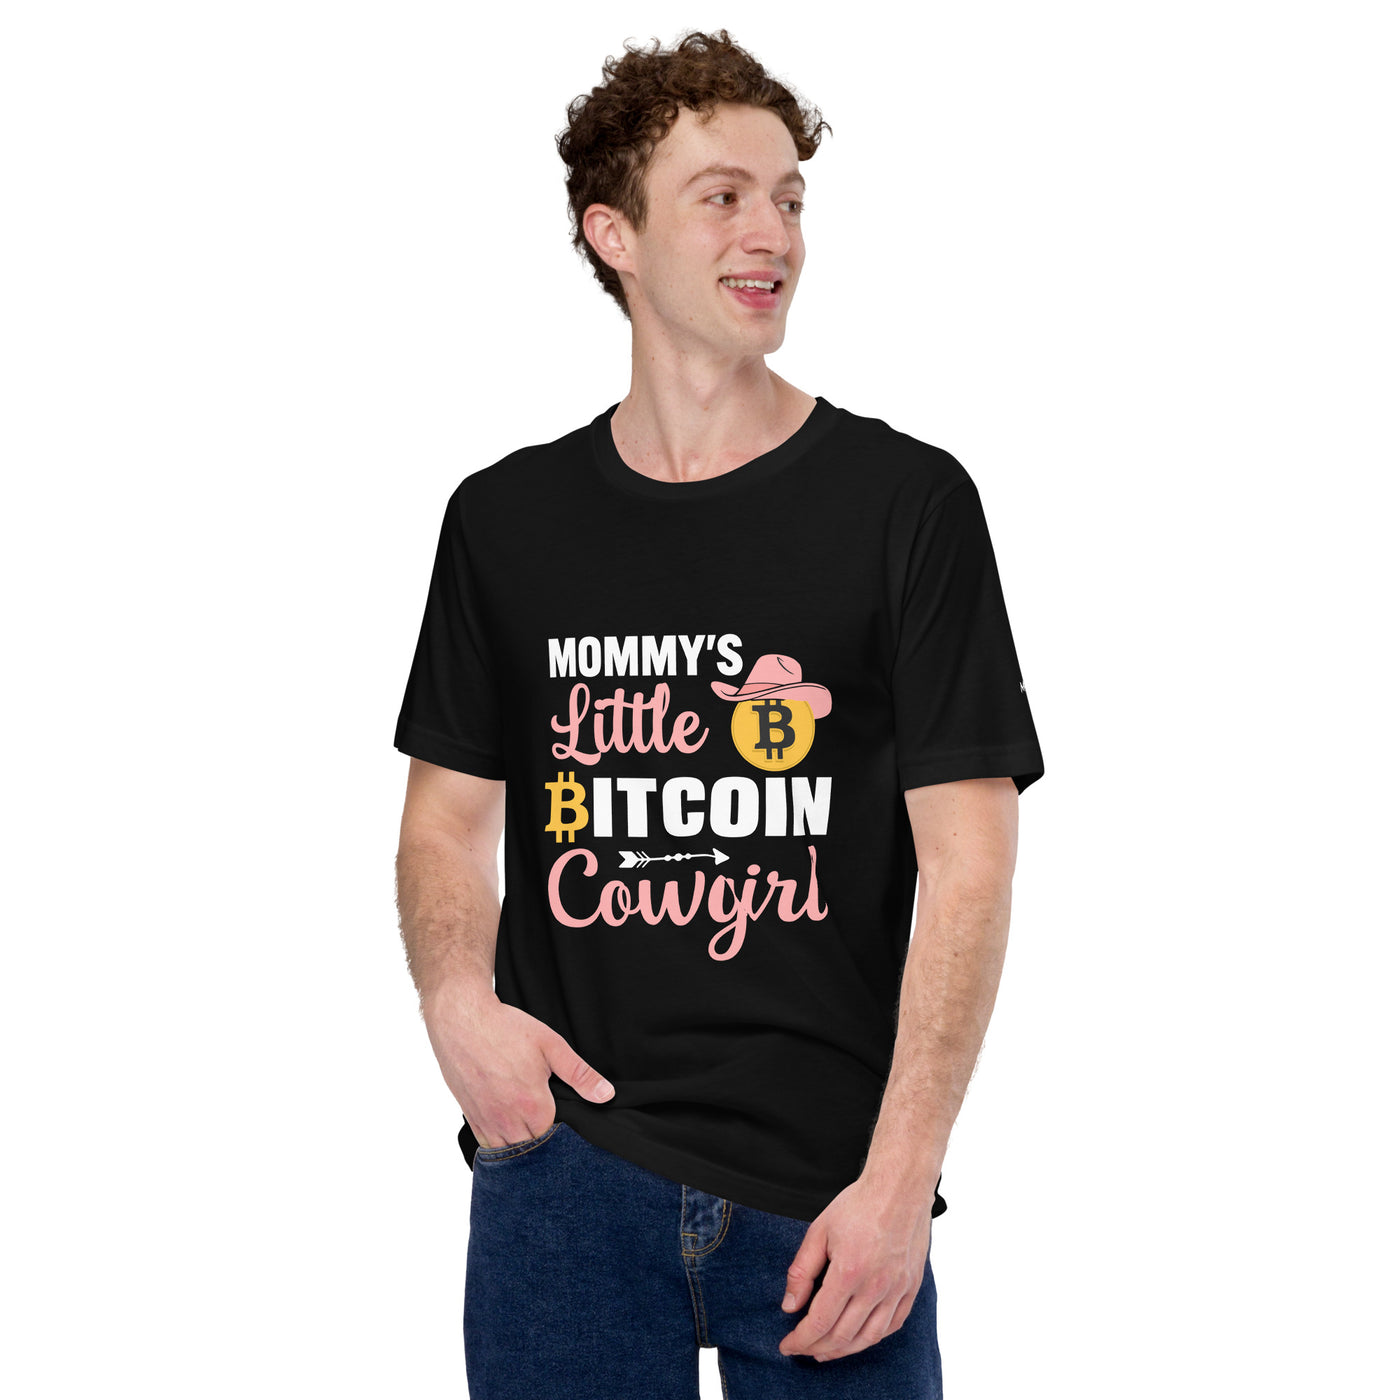 Mommy's little bitcoin cowgirl - Unisex t-shirt